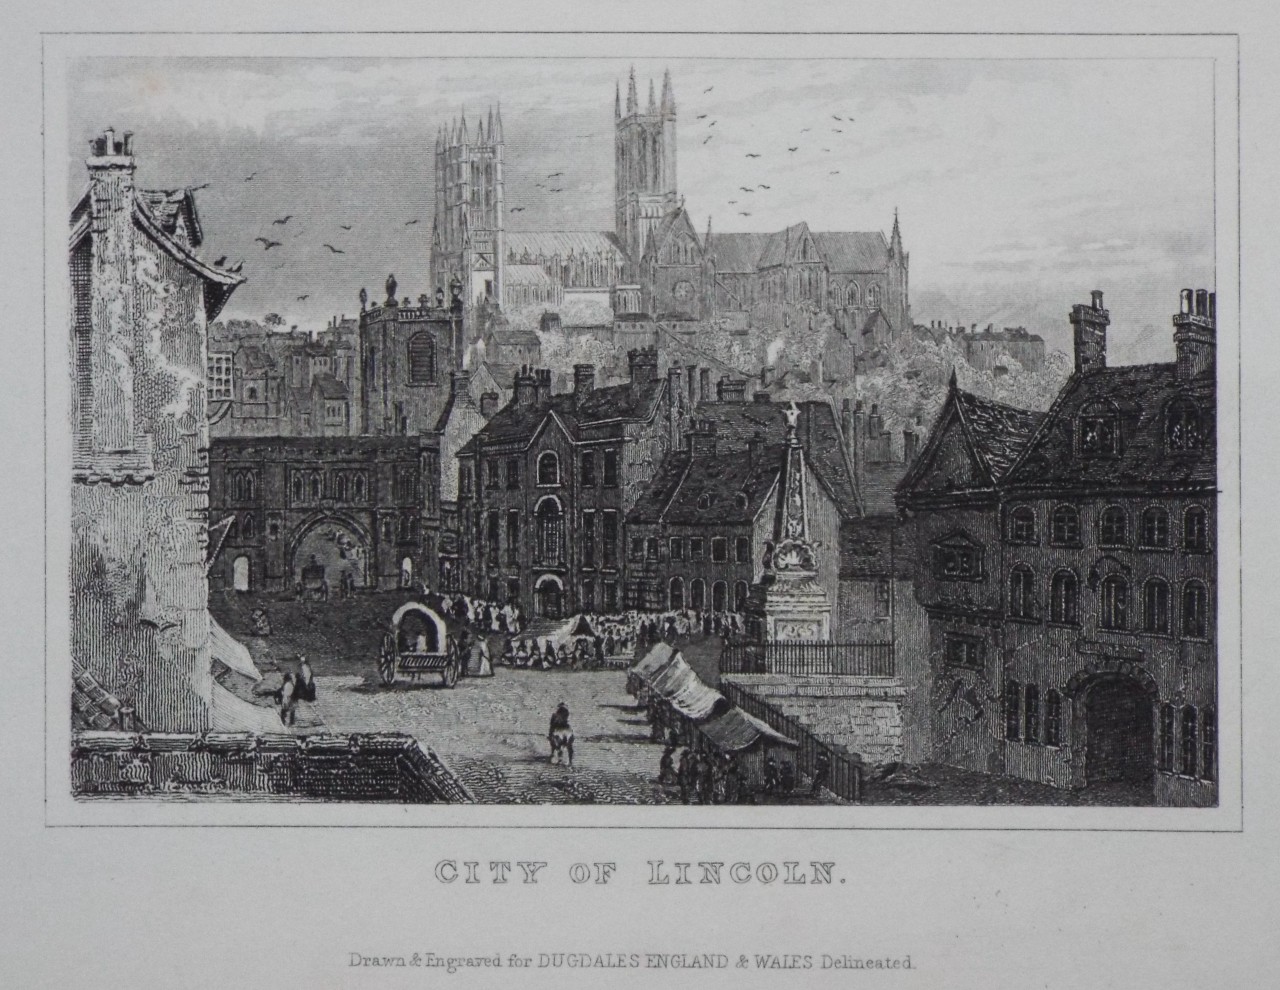 Print - City of Lincoln.